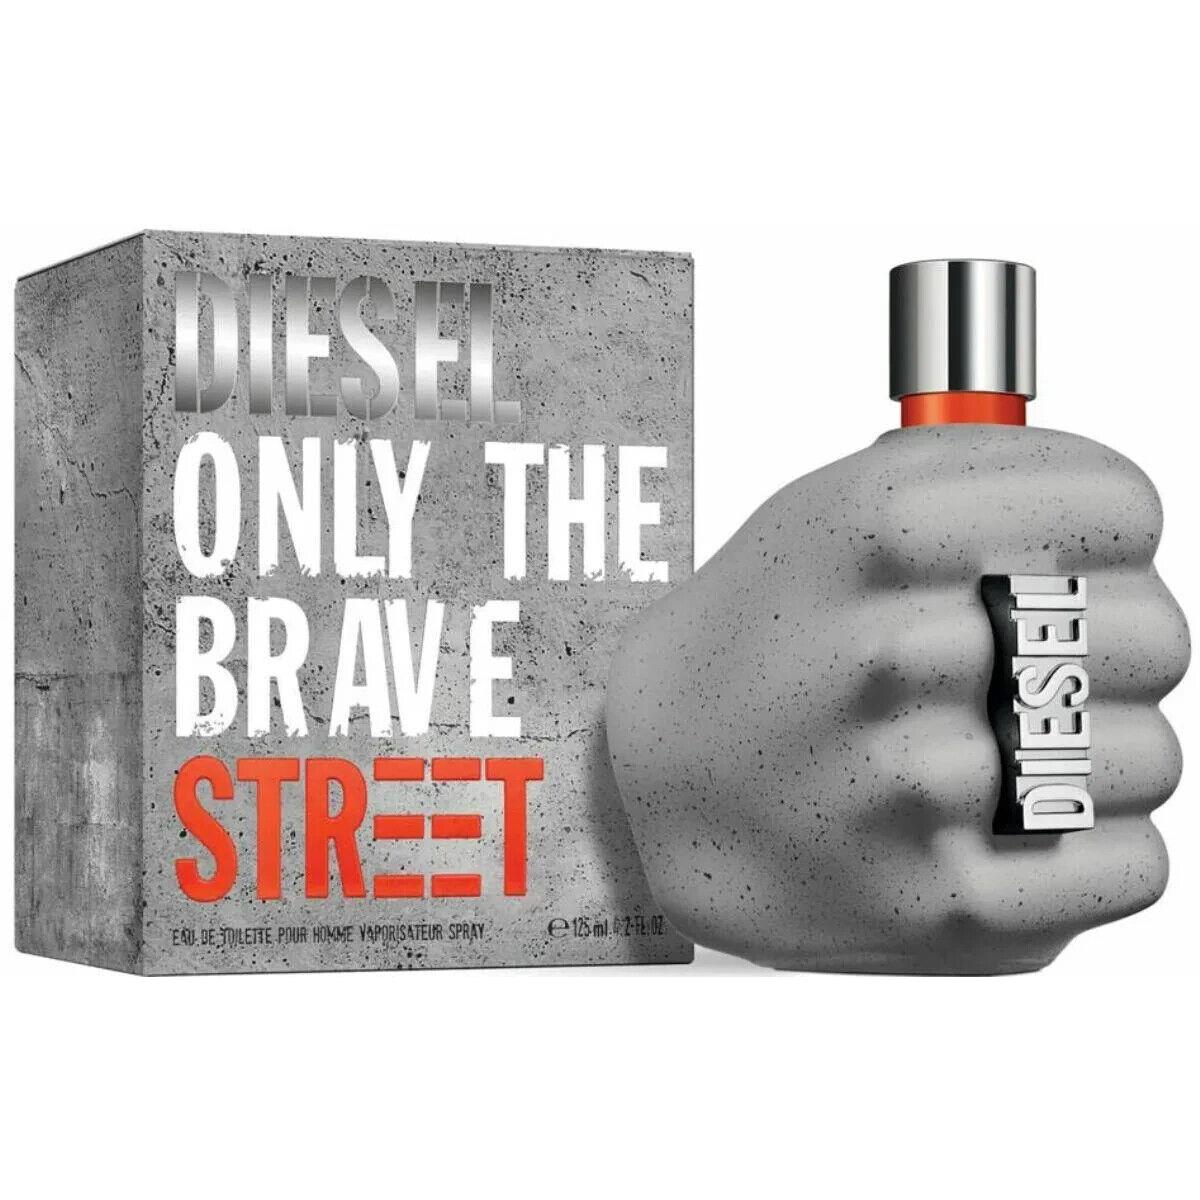 Only The Brave Street by Diesel Cologne For Men Edt 4.2 oz